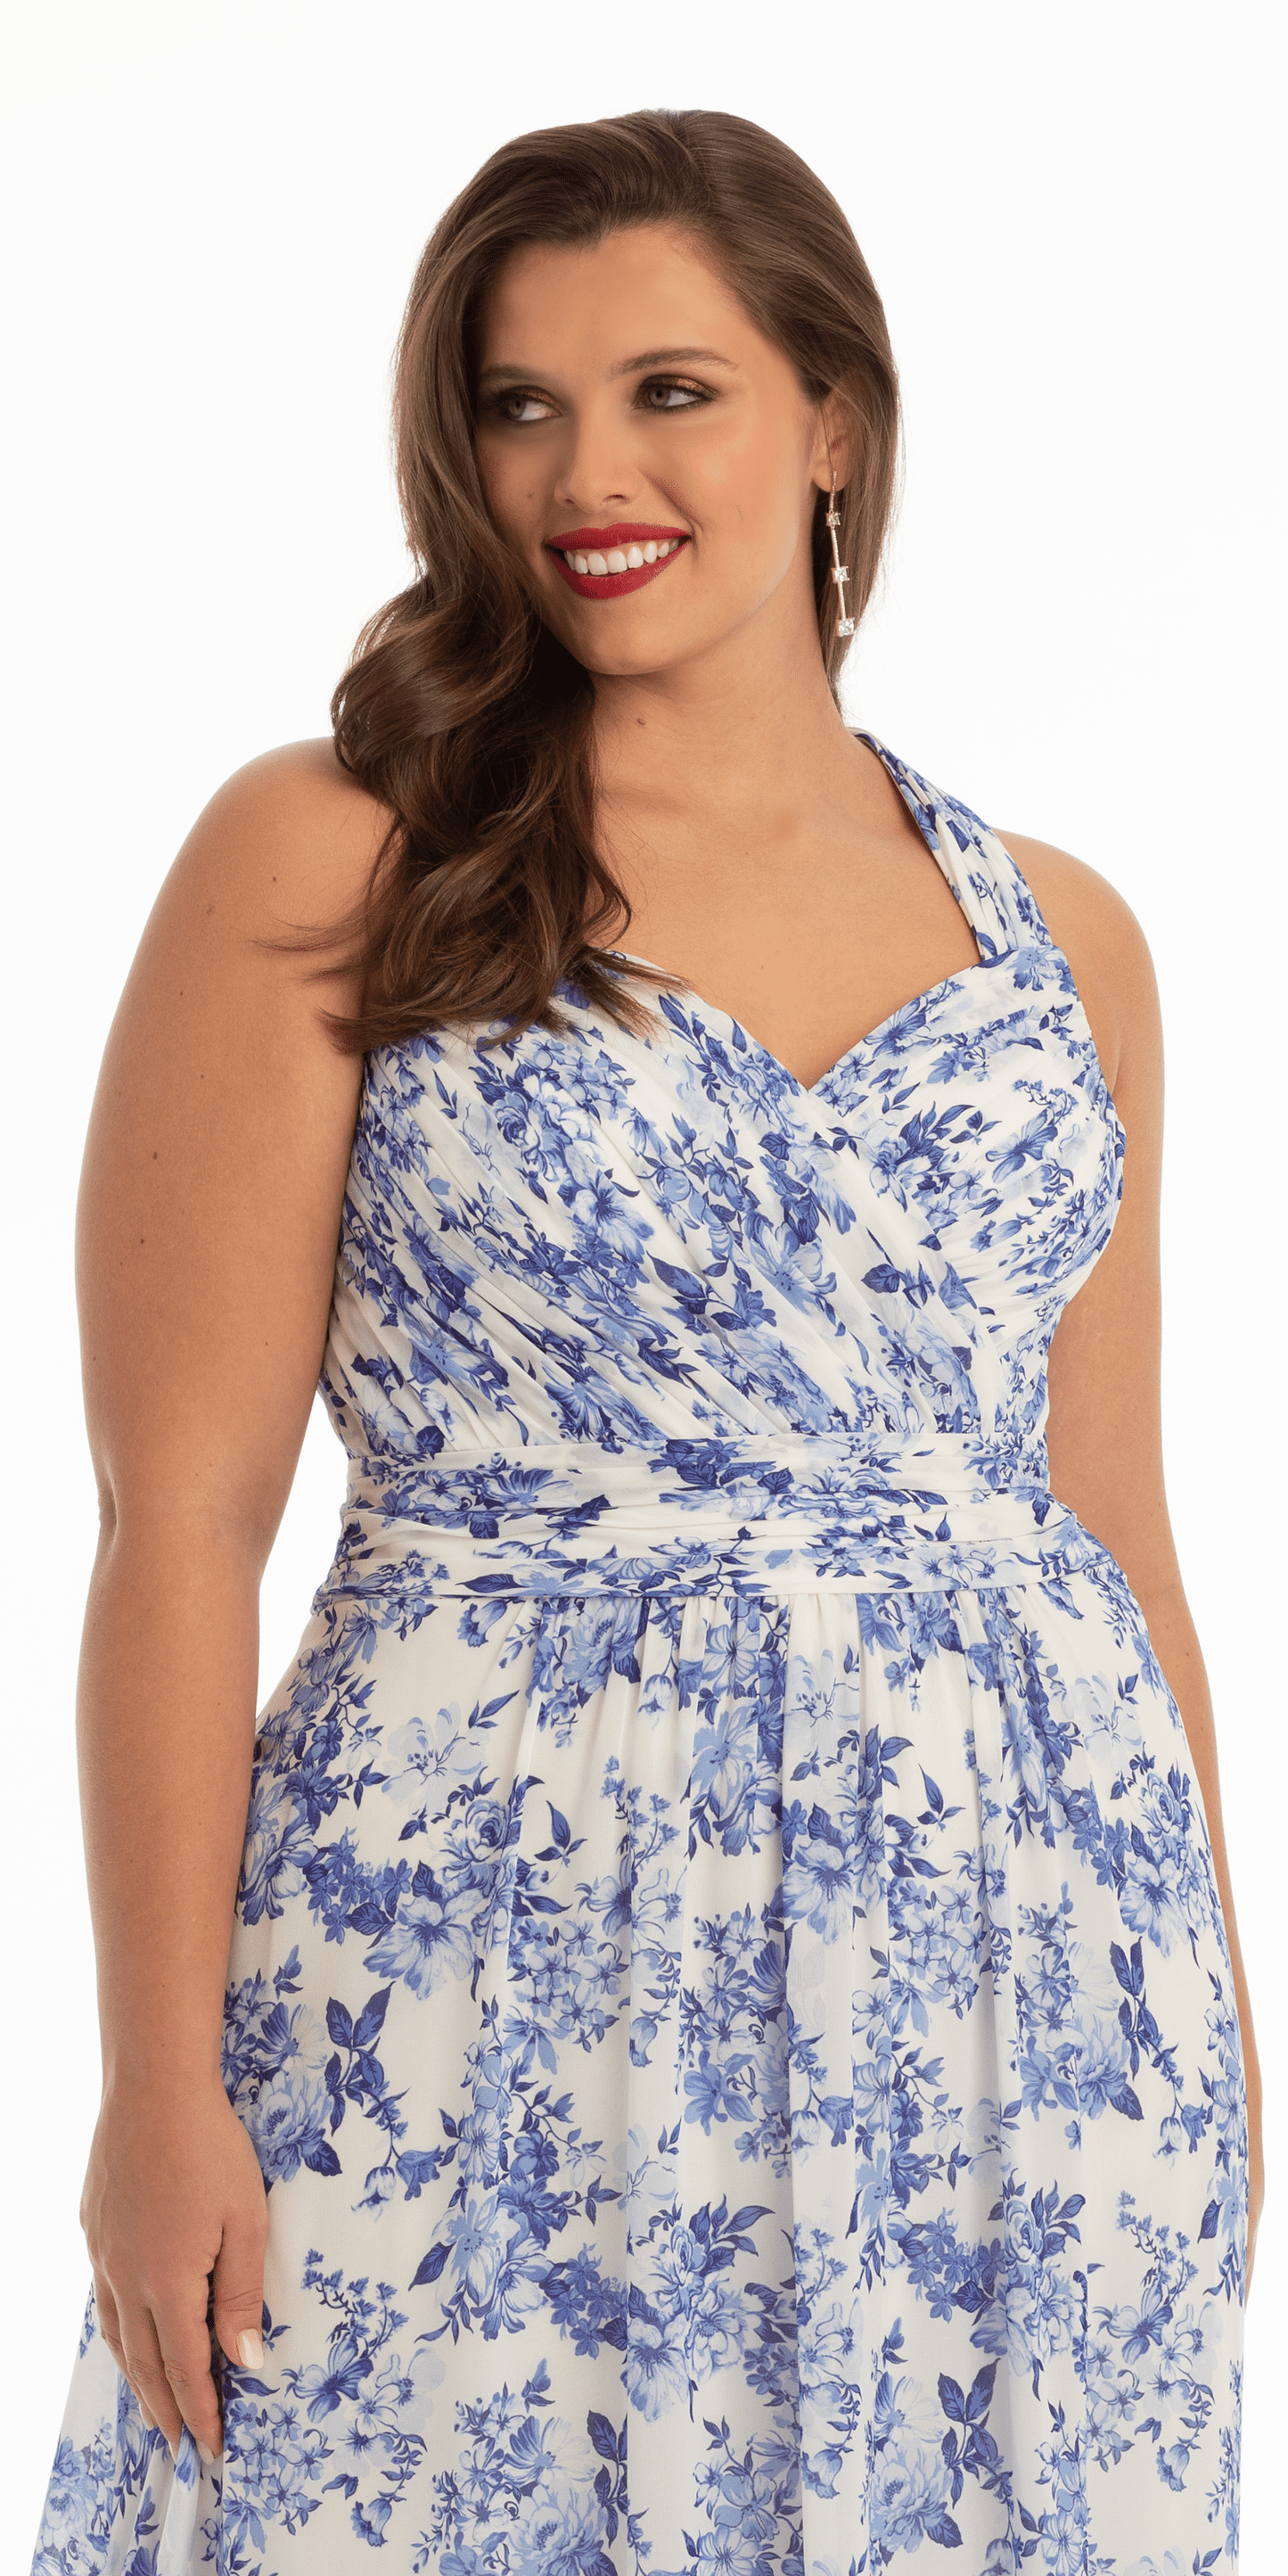 Camille La Vie Sweetheart Floral A Line Dress with X Back missy / 0 / white-blue